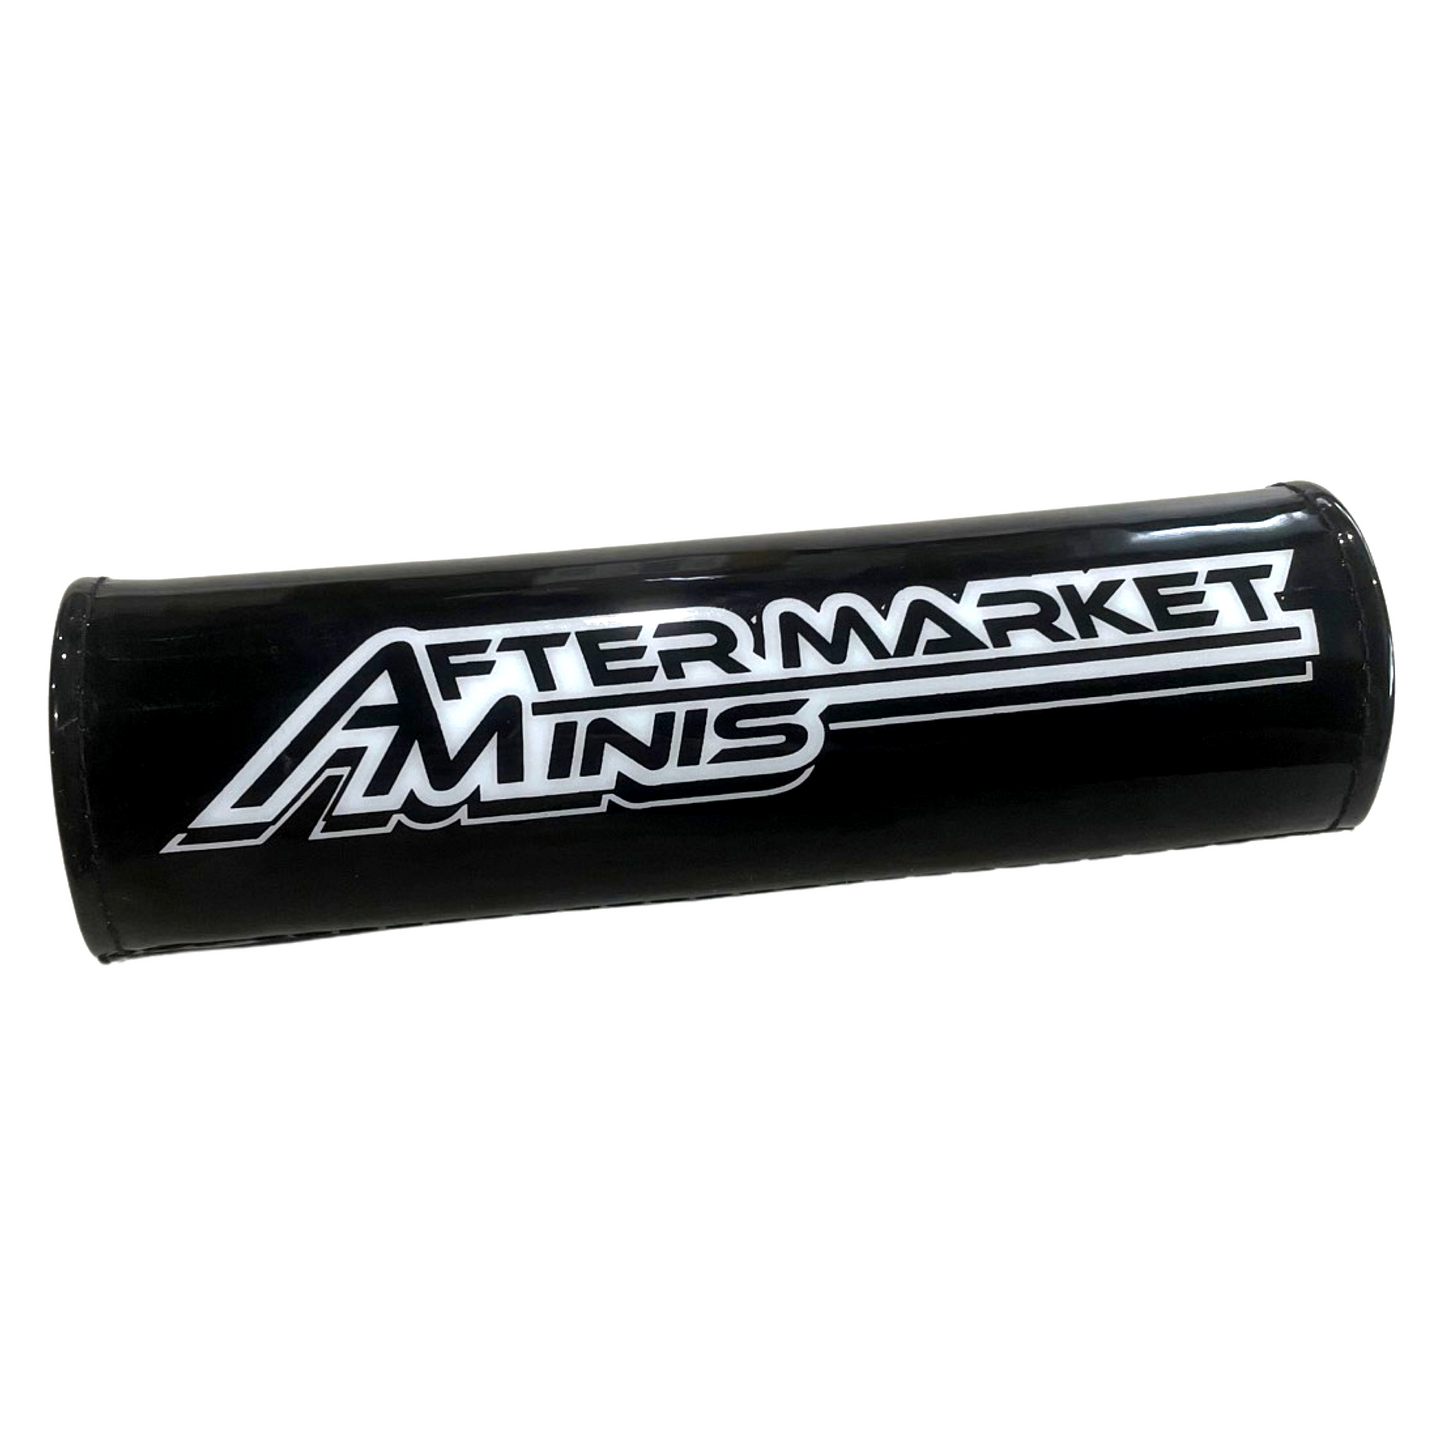 PW50 Aftermarket Minis Replacement Handlebar pad and cover